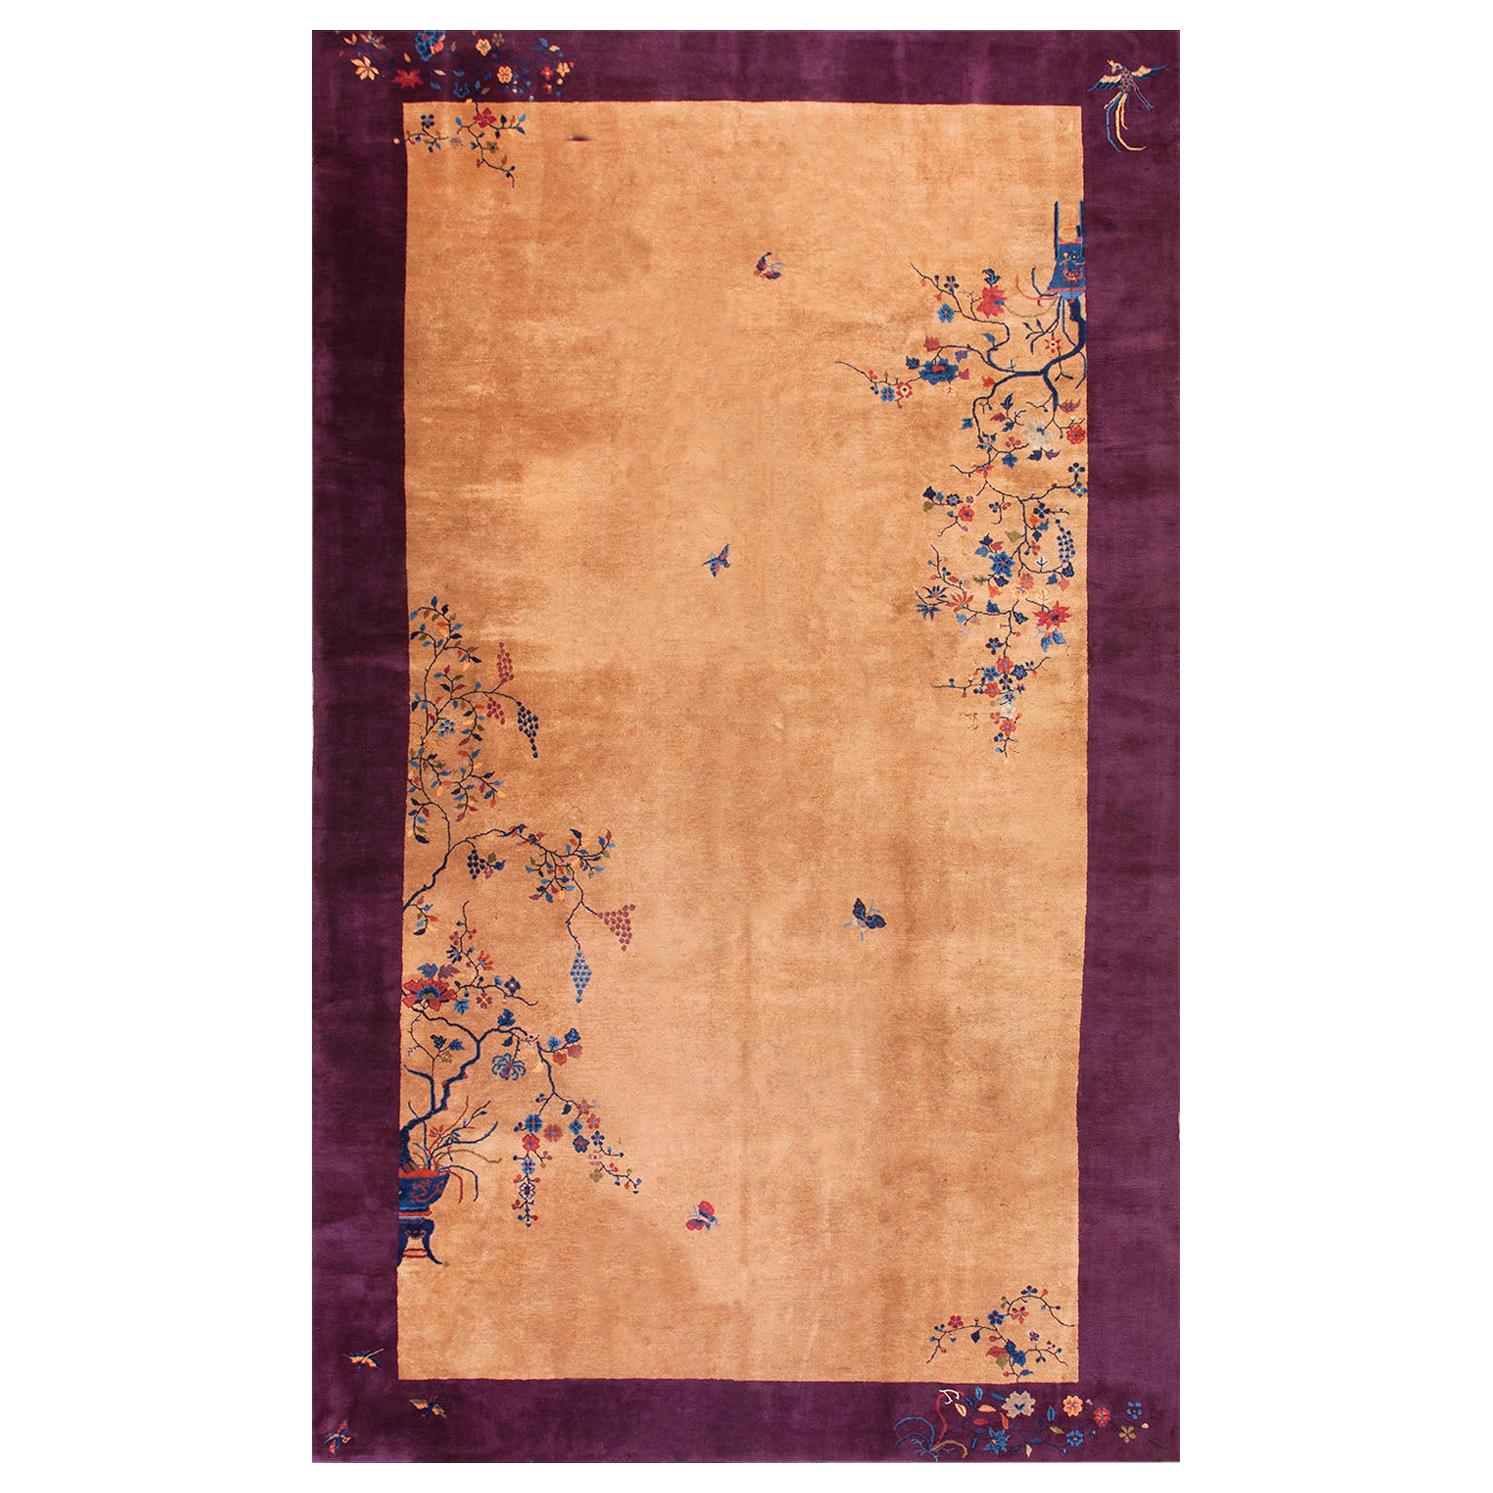 1920s Chinese Art Deco Carpet ( 9'10" x 17' - 300 x 520 ) For Sale